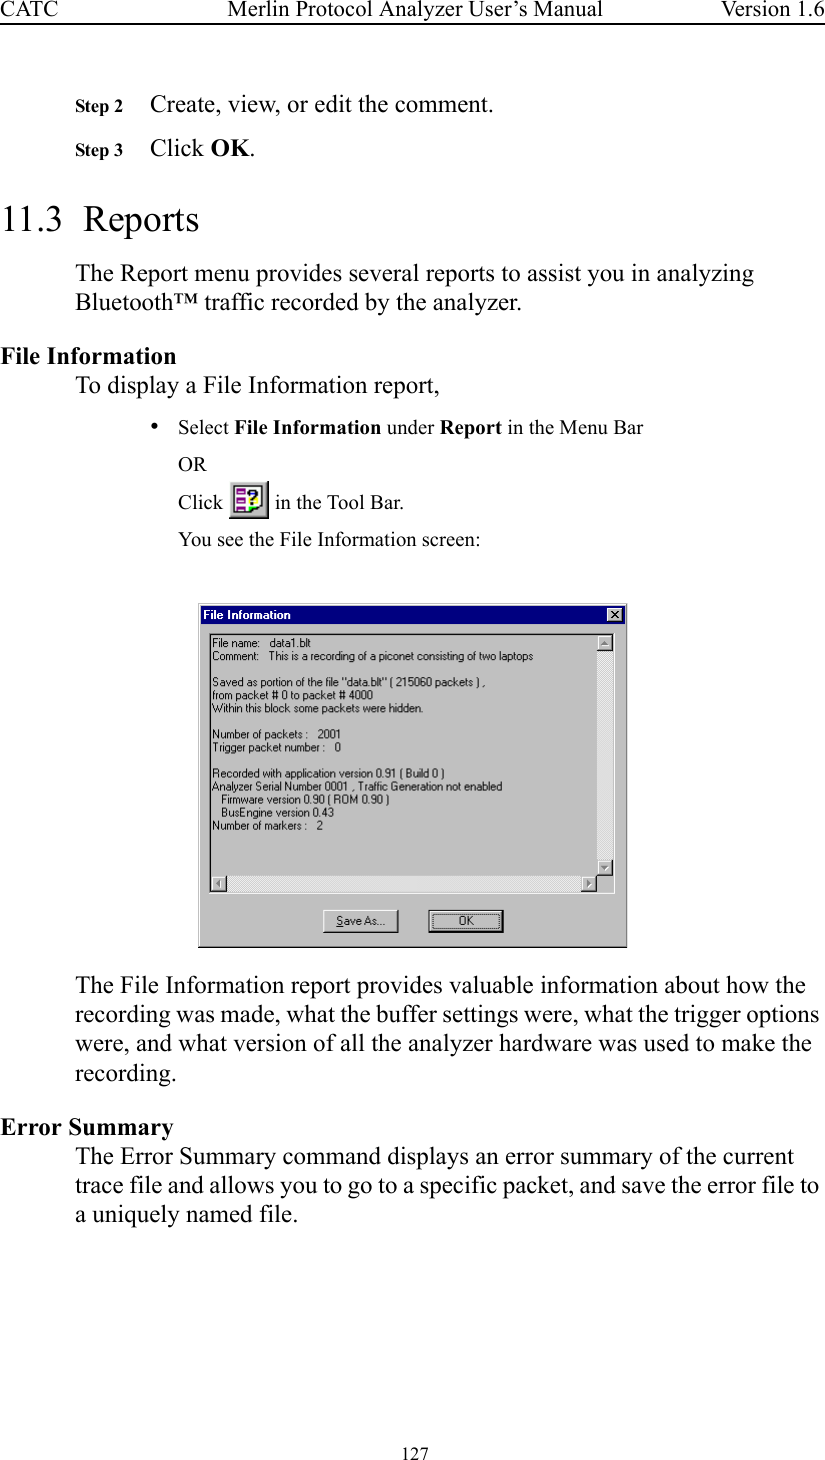  127 Merlin Protocol Analyzer User’s ManualCATC Version 1.6Step 2 Create, view, or edit the comment.Step 3 Click OK.11.3  ReportsThe Report menu provides several reports to assist you in analyzing Bluetooth™ traffic recorded by the analyzer.File InformationTo display a File Information report,•Select File Information under Report in the Menu BarORClick   in the Tool Bar.You see the File Information screen:The File Information report provides valuable information about how the recording was made, what the buffer settings were, what the trigger options were, and what version of all the analyzer hardware was used to make the recording.Error SummaryThe Error Summary command displays an error summary of the current trace file and allows you to go to a specific packet, and save the error file to a uniquely named file.